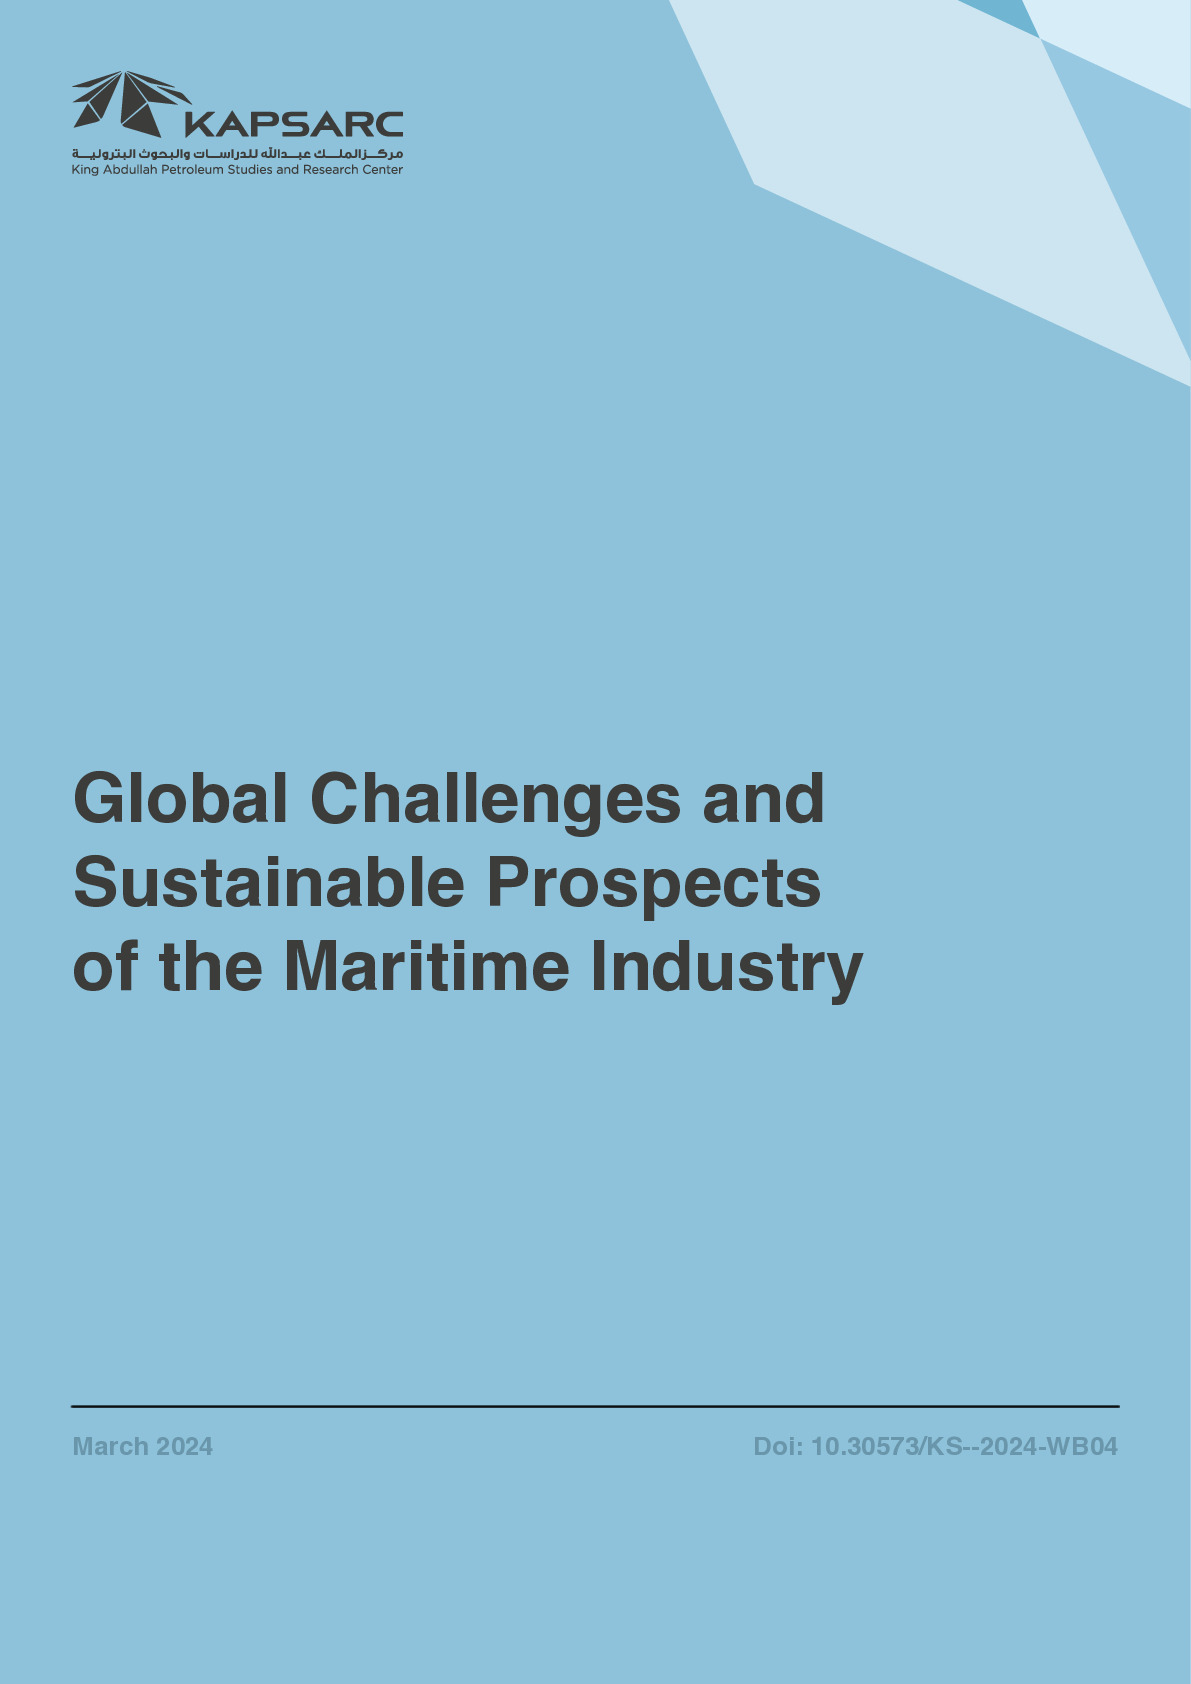 Global Challenges and Sustainable Prospects of the Maritime Industry